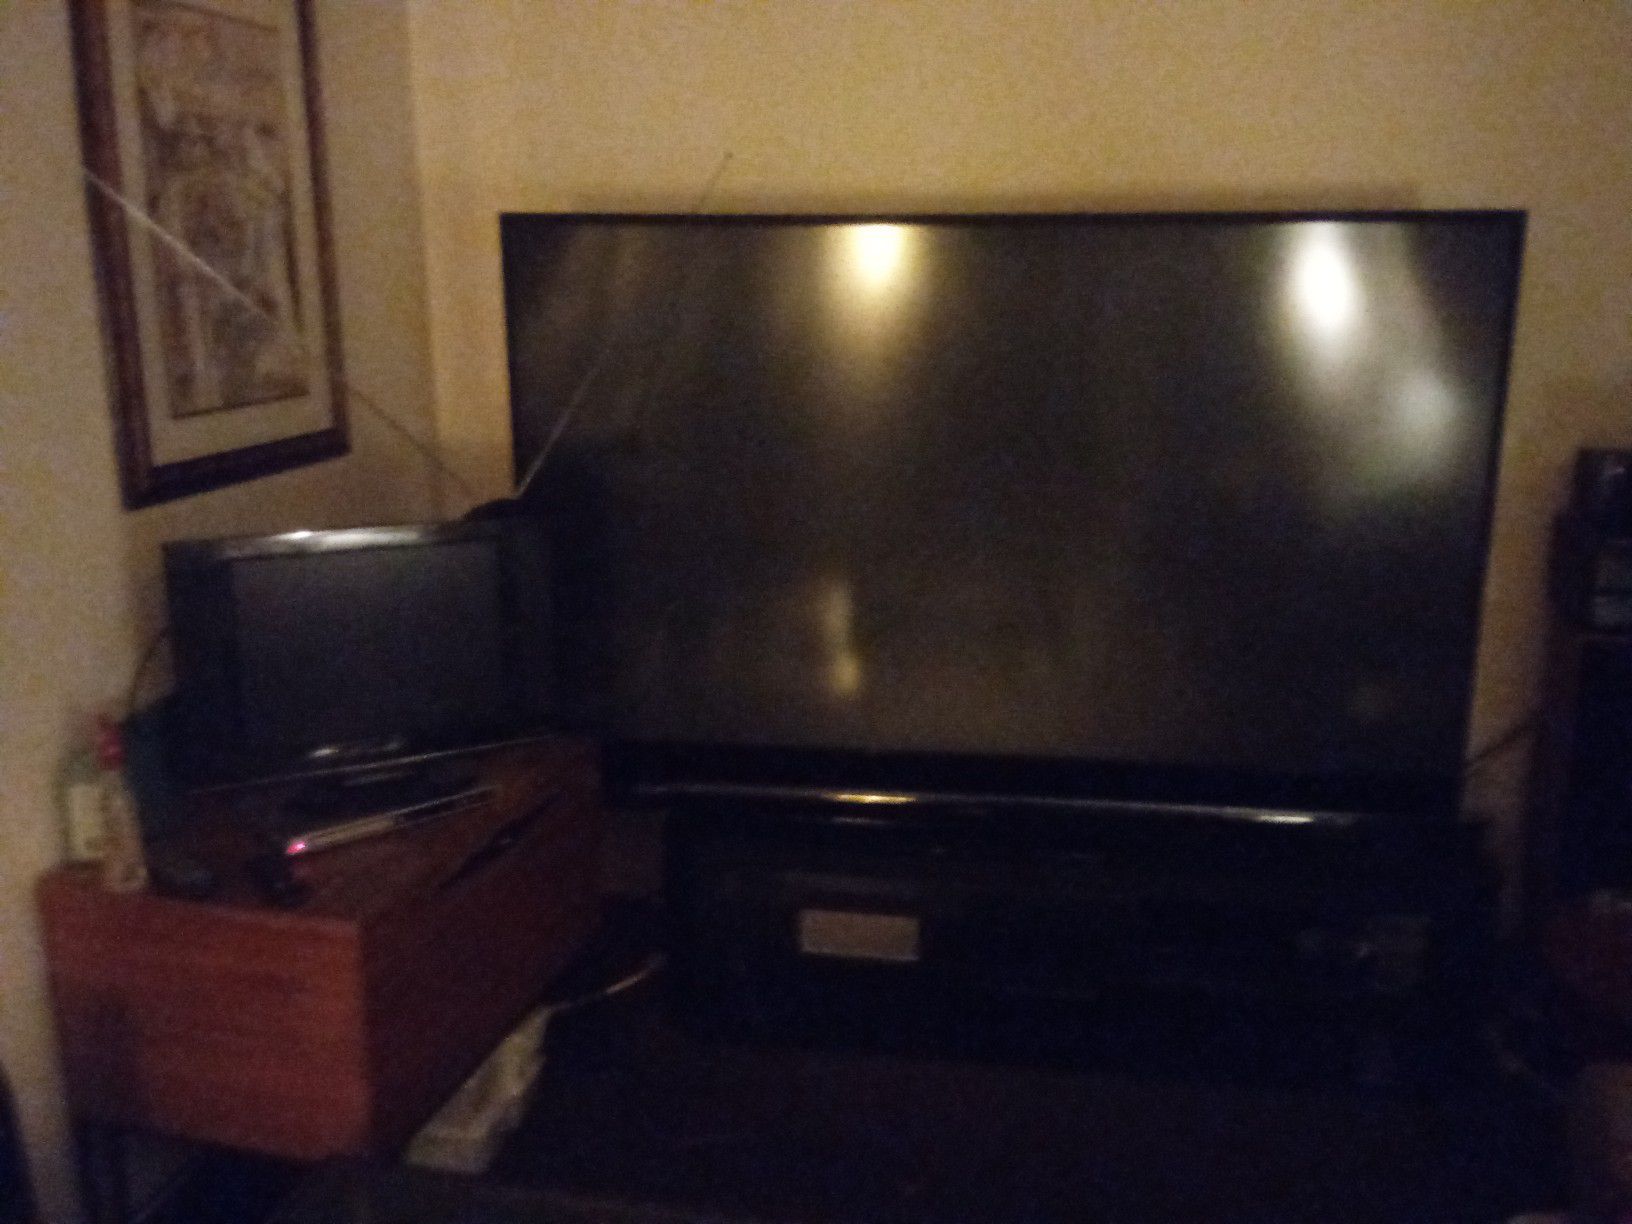 3D Mitsubishi 82 inch TV with stand